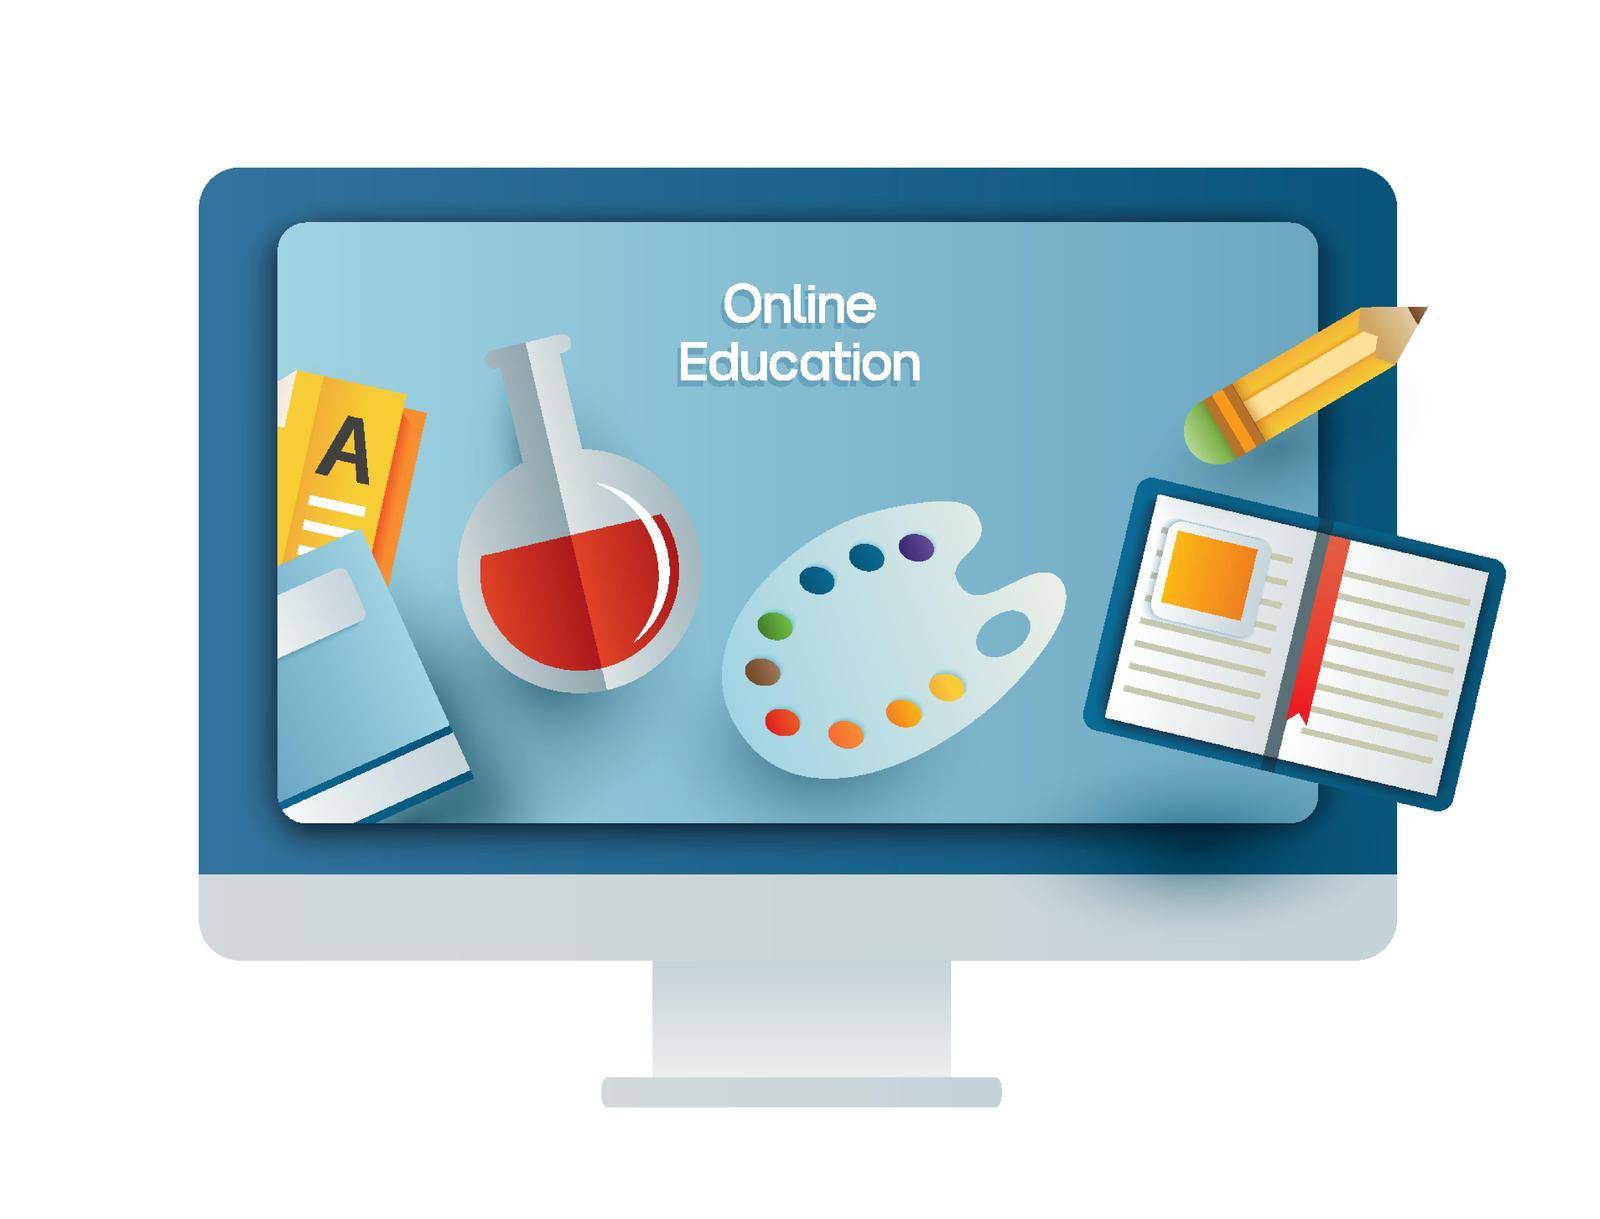 Online education learning on computer. Learning at home with social distancing concept.